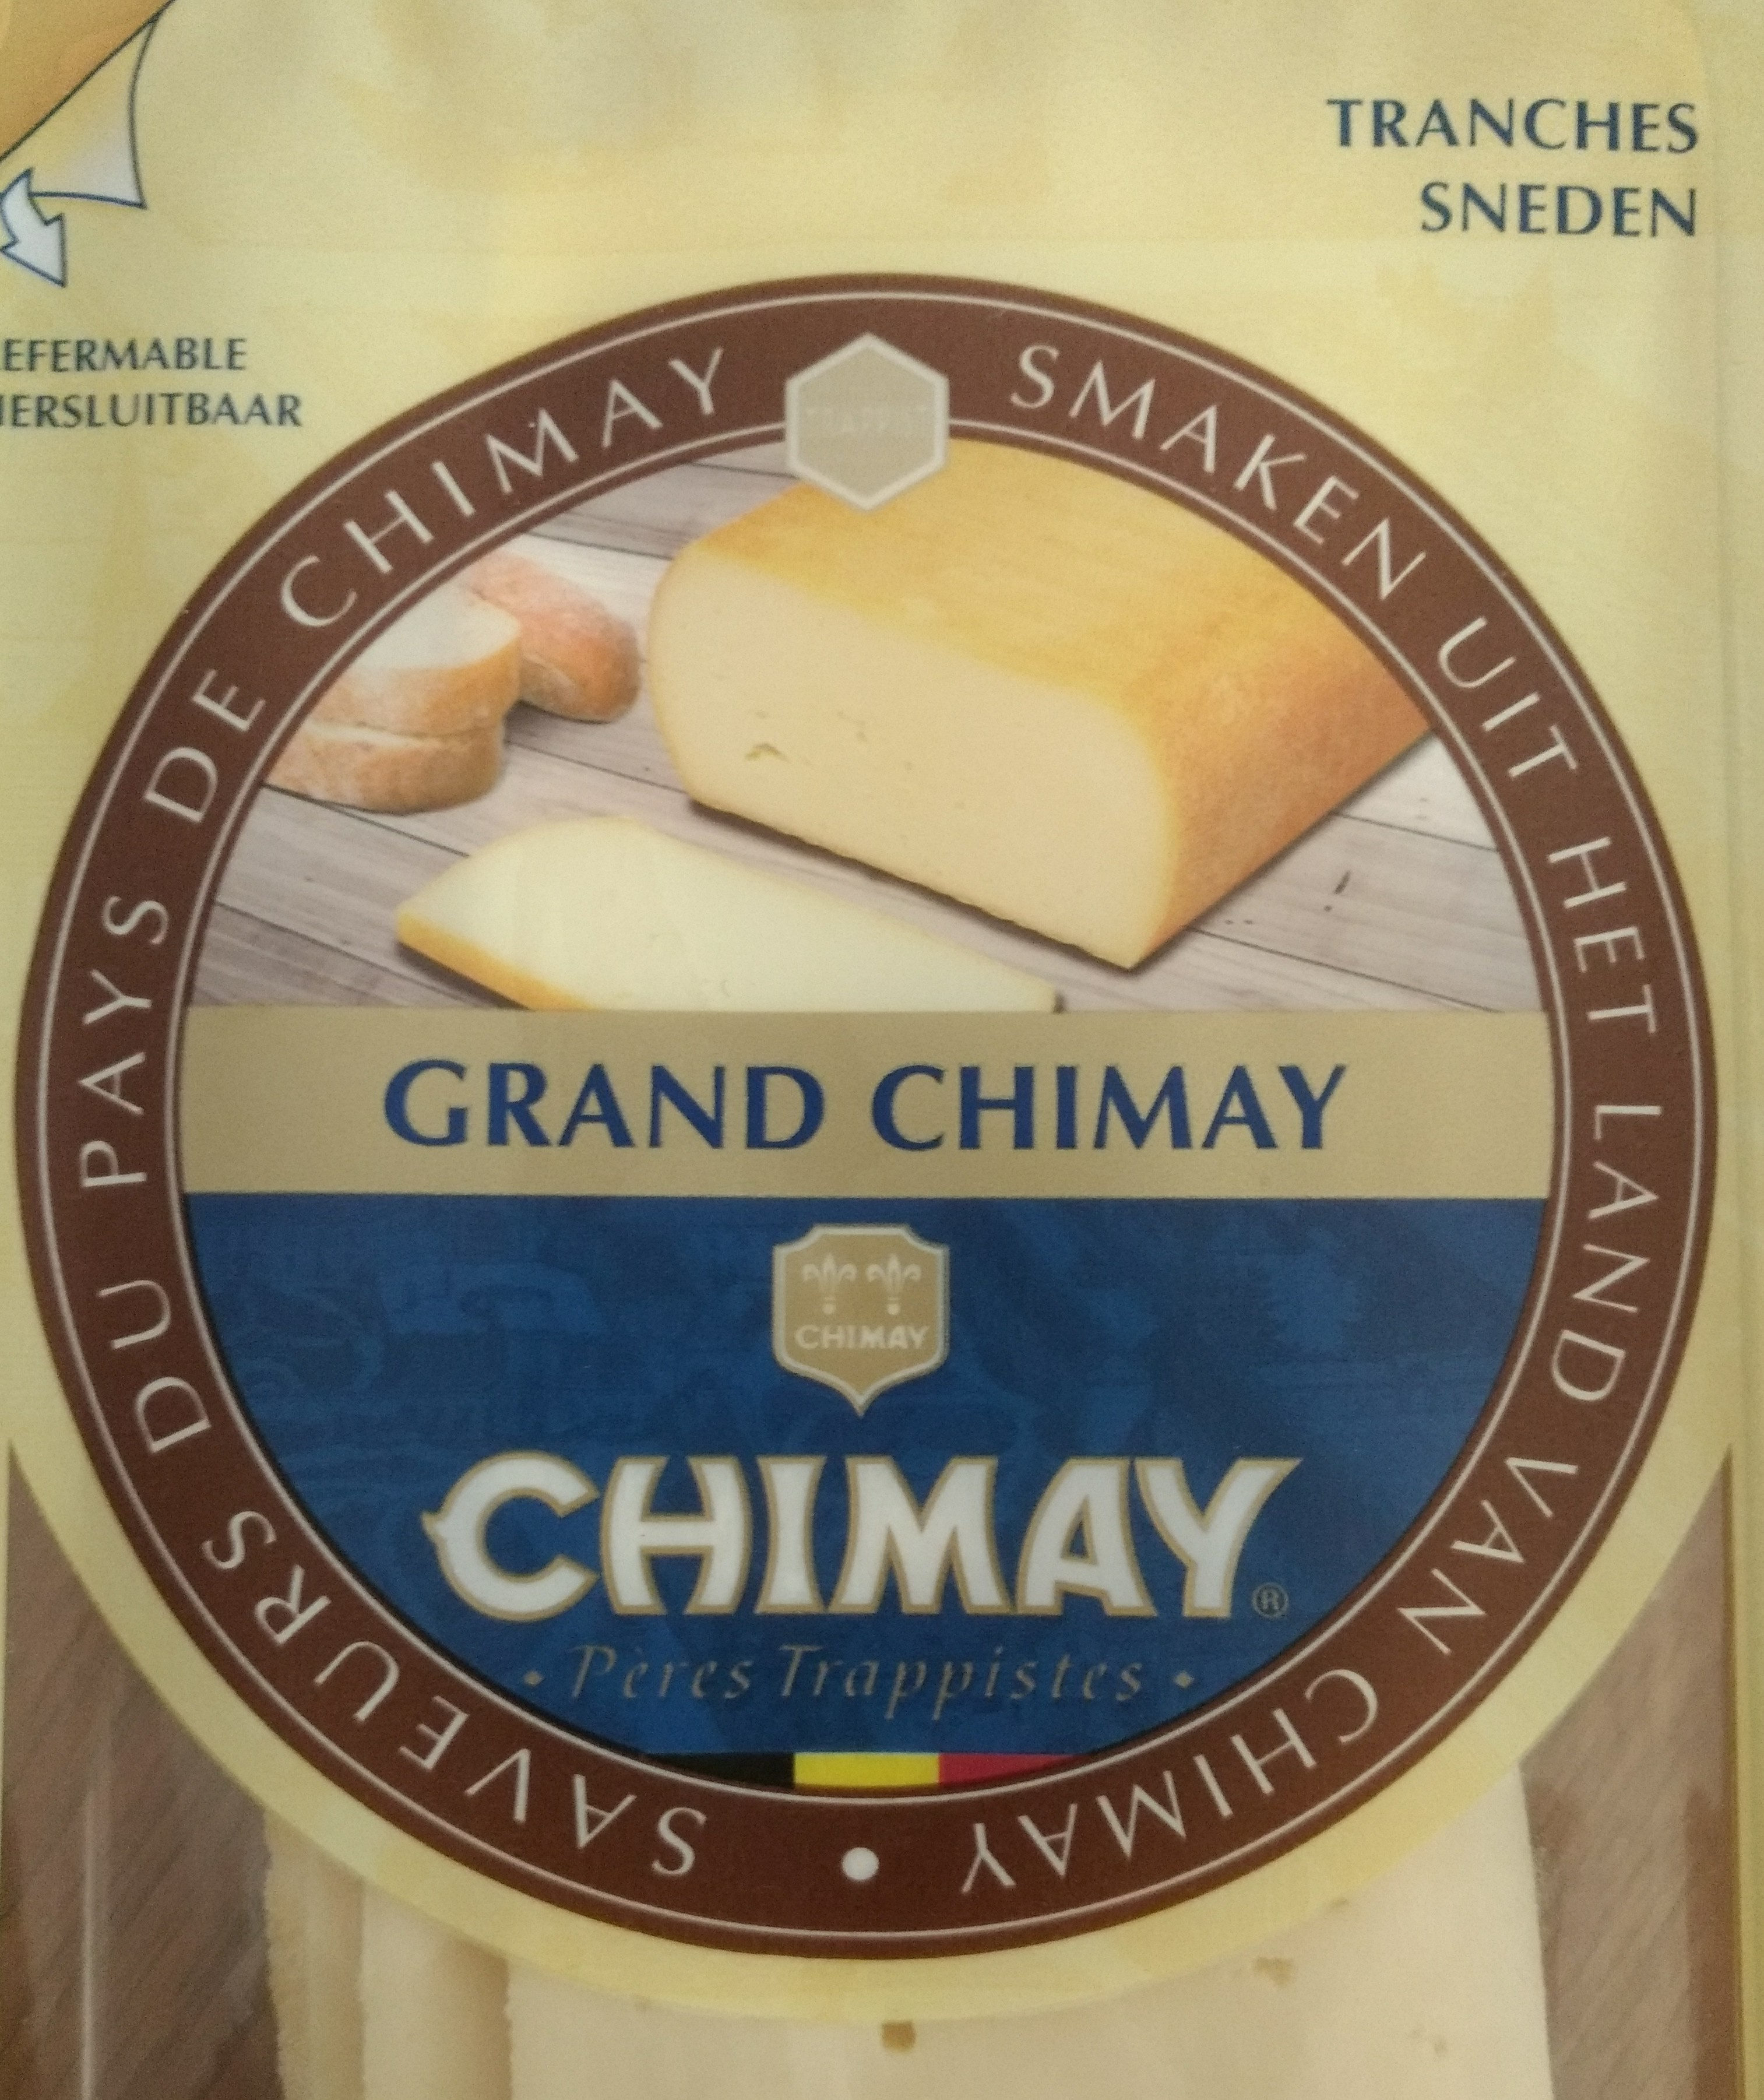 Grand Chimay - fromage trappiste - Product - fr